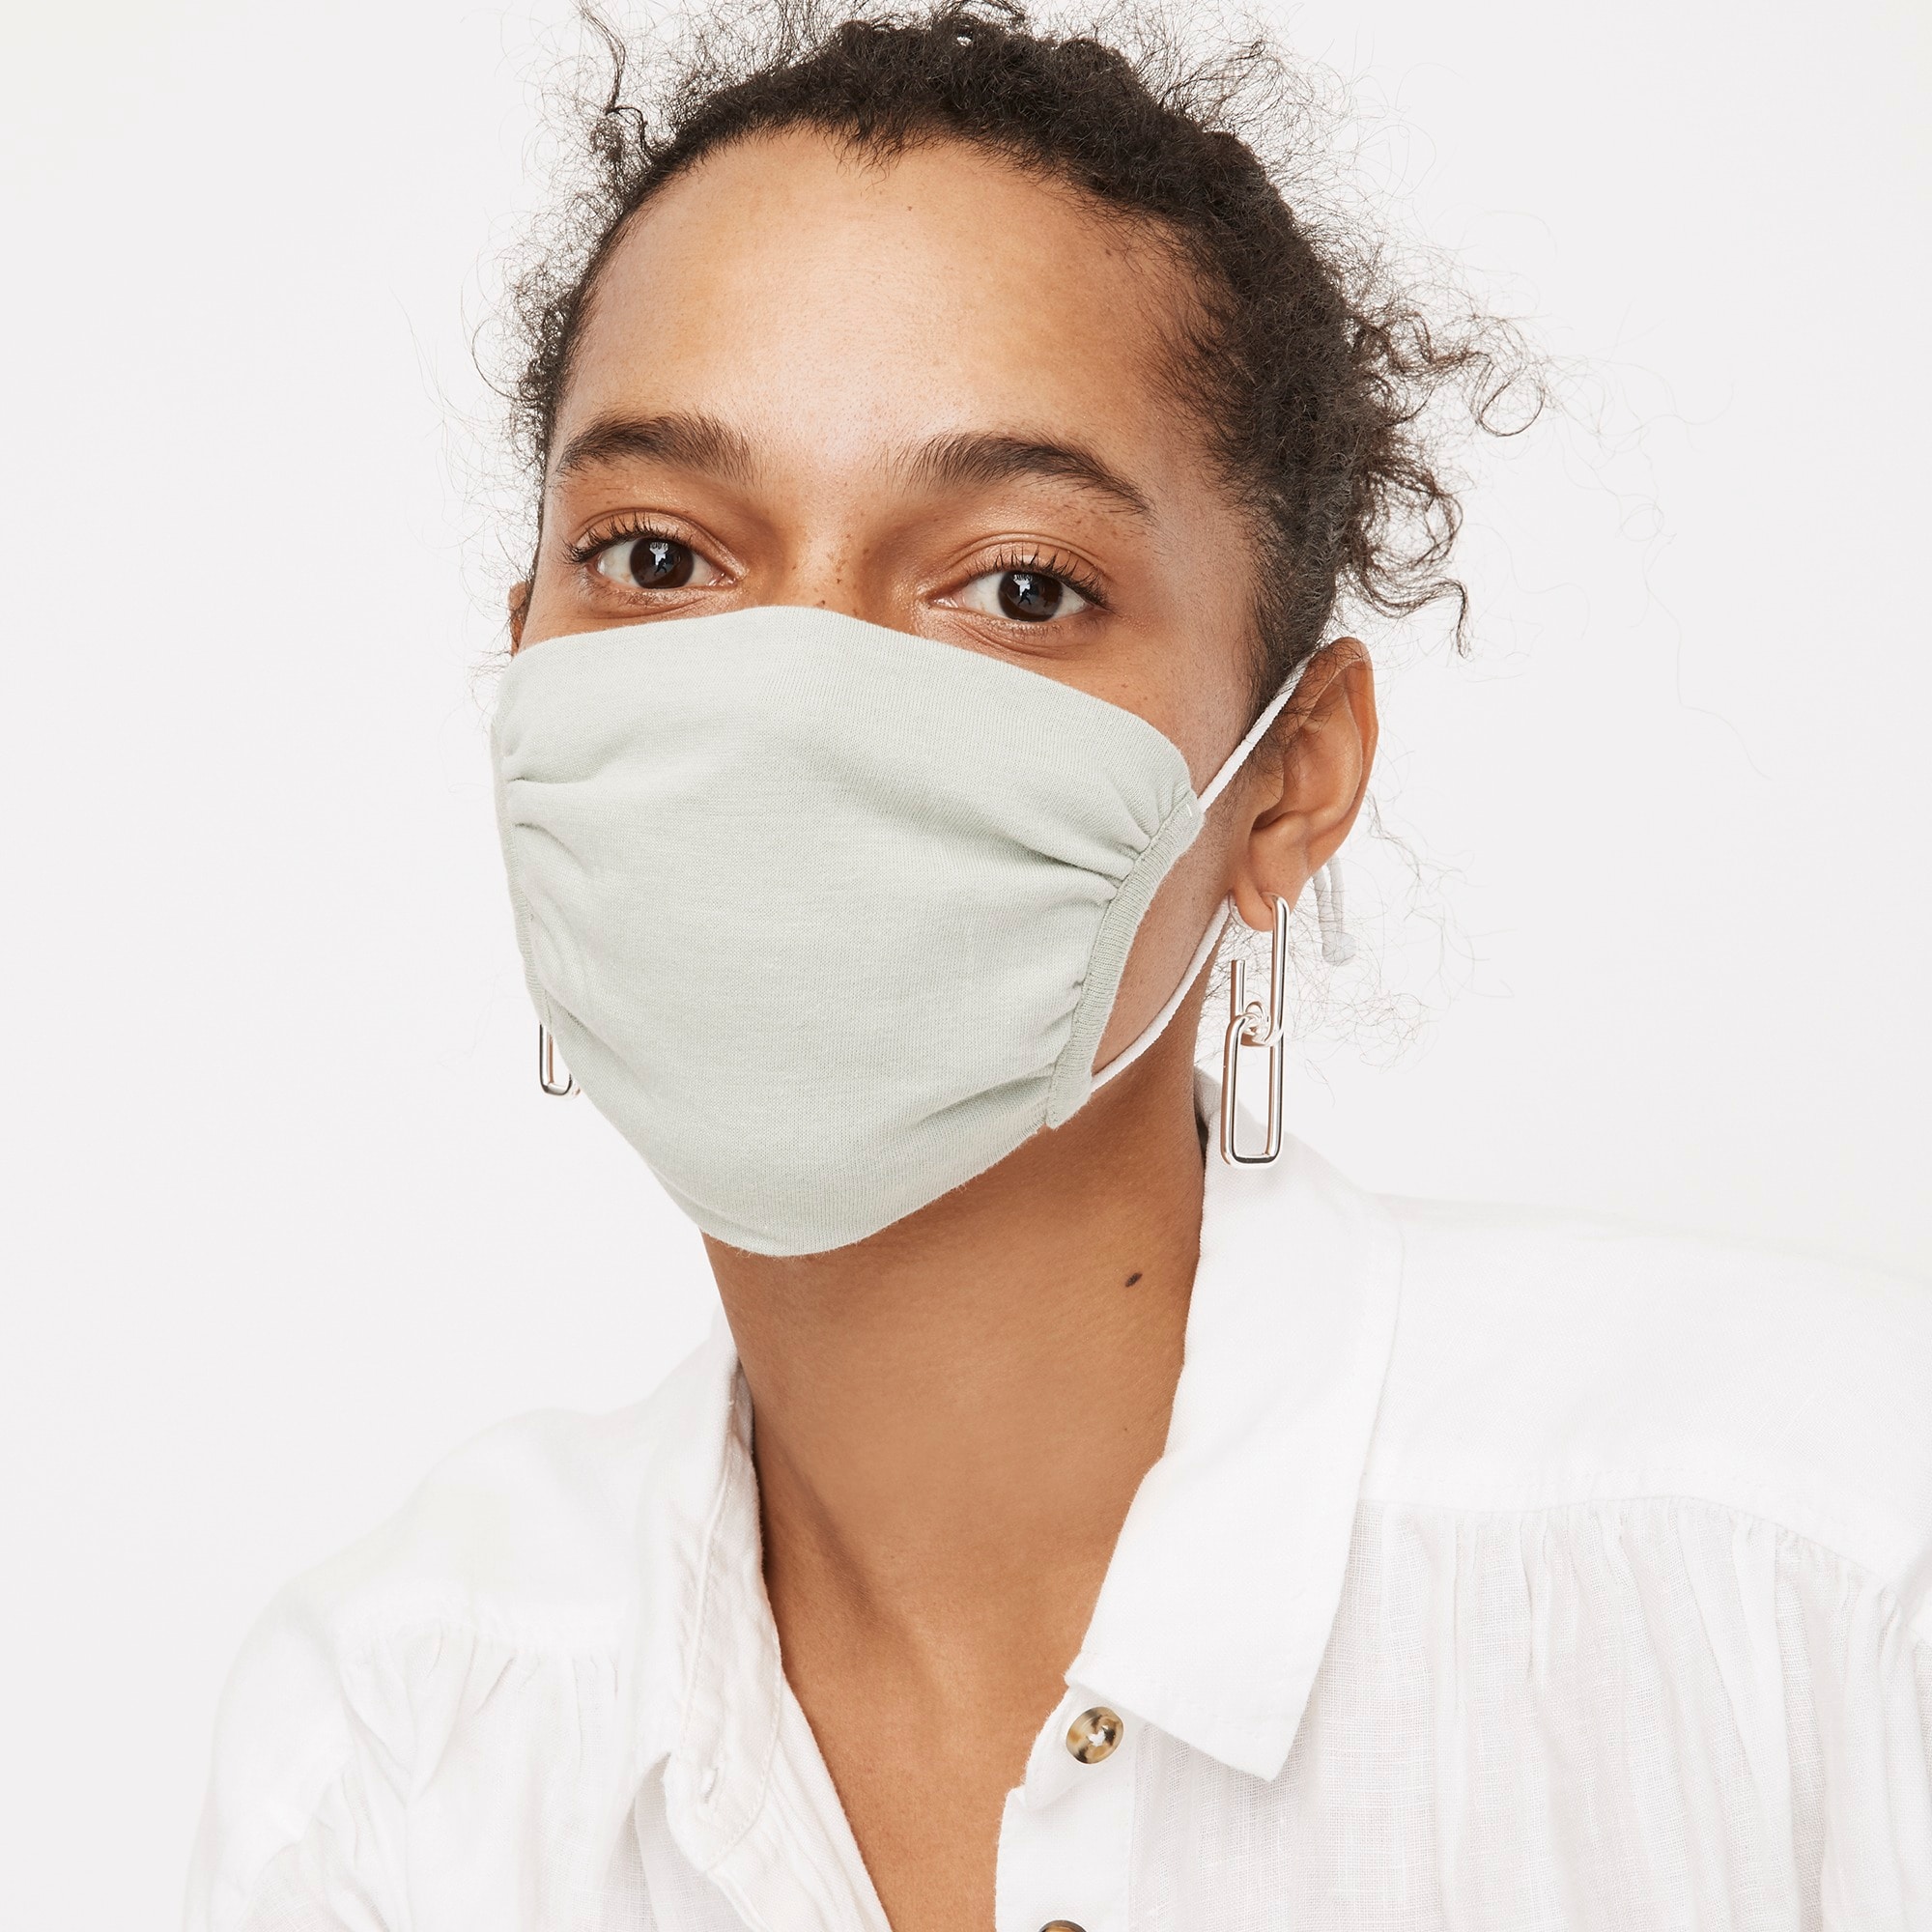 Jcrew Pack-of-three scrunched nonmedical face masks